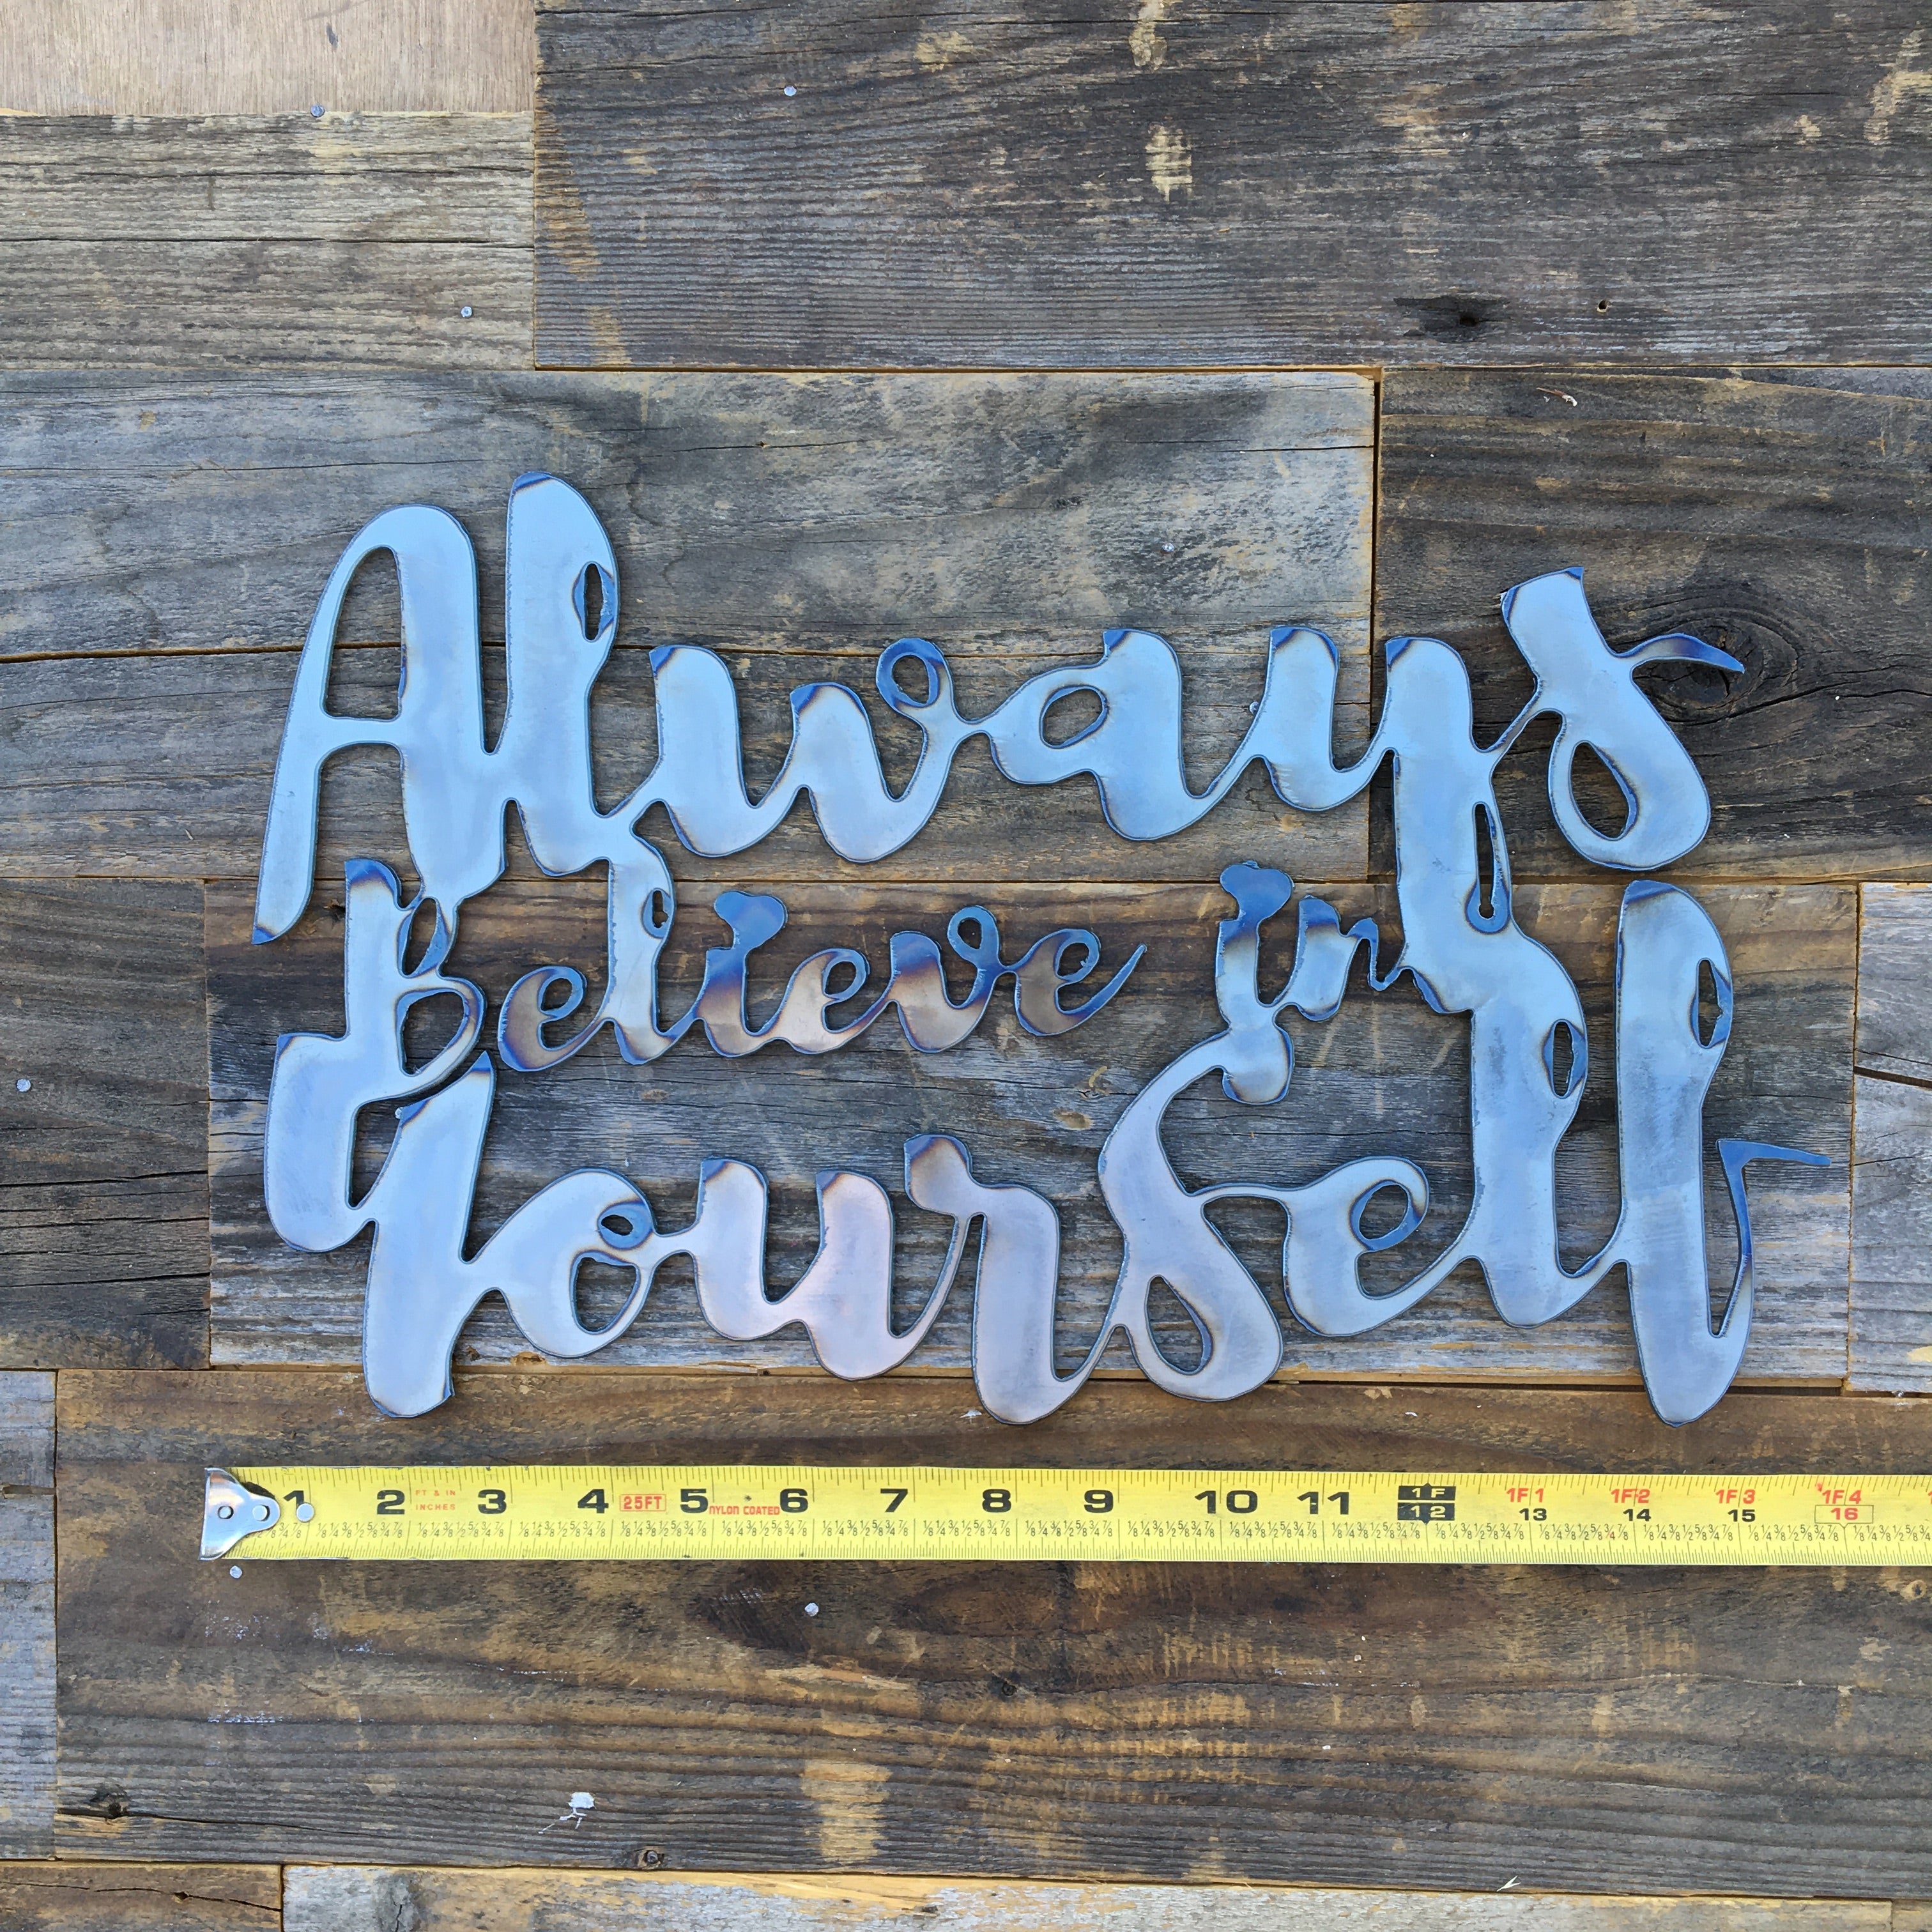 Rustic Home, Always Believe in Yourself 15 x 10,  Farmhouse, Metal Words, Kitchen Wall Decor, Home Decor, Farmhouse Sign, Motivational, Christian